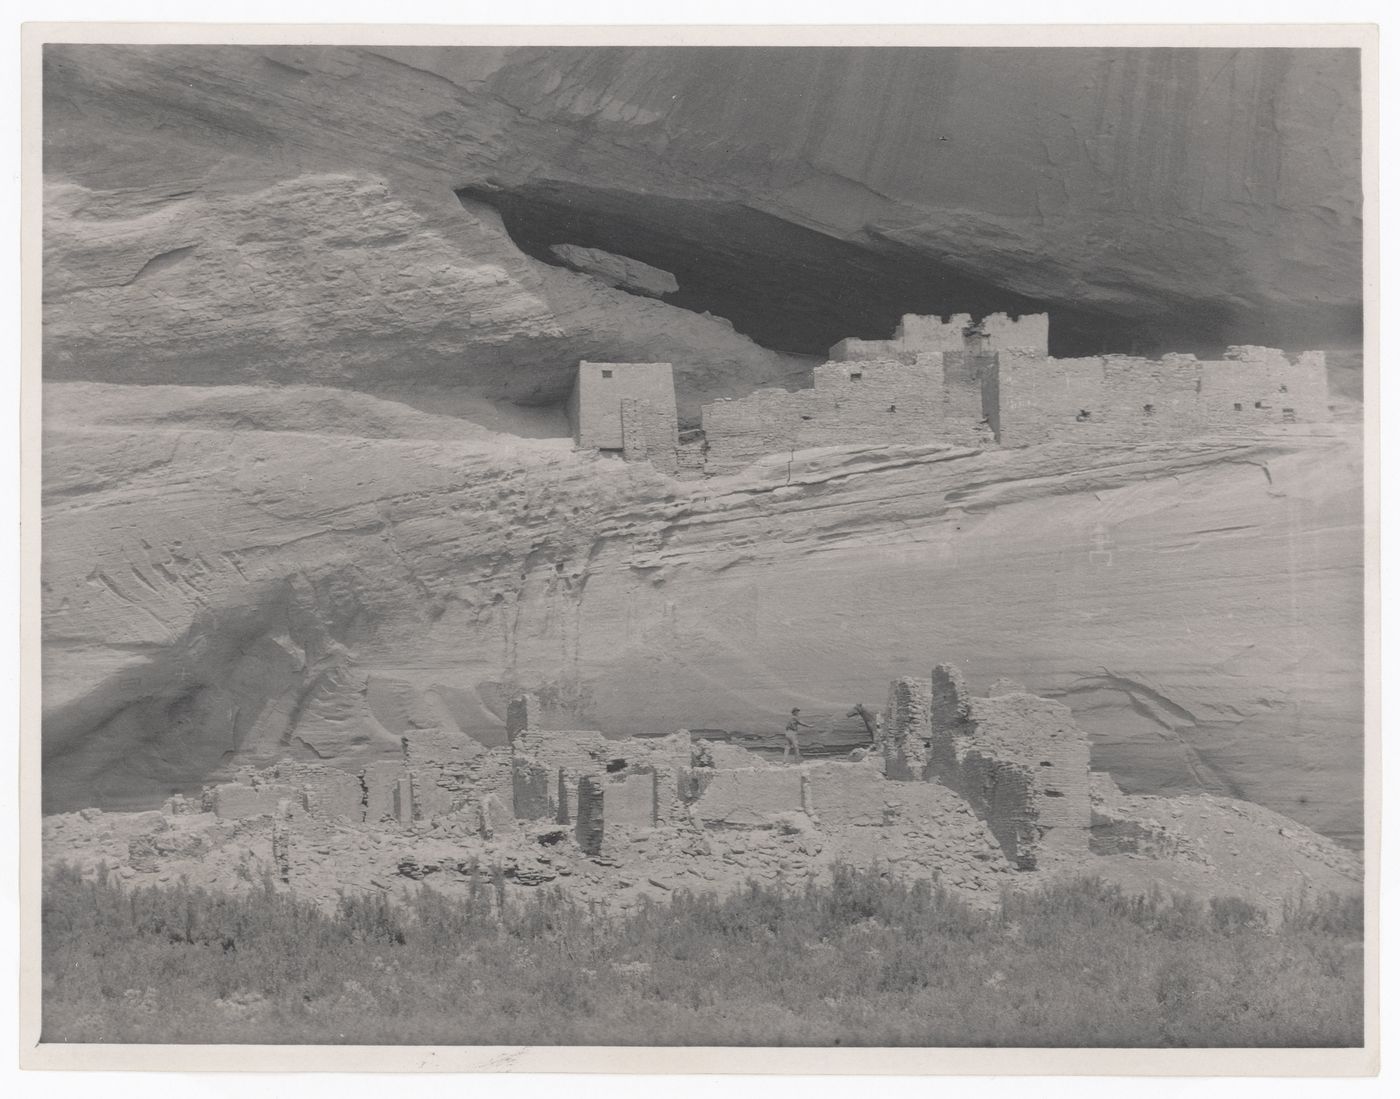 View of the White House ruins and showing a man and a horse, Canyon de Chelly, Arizona, United States